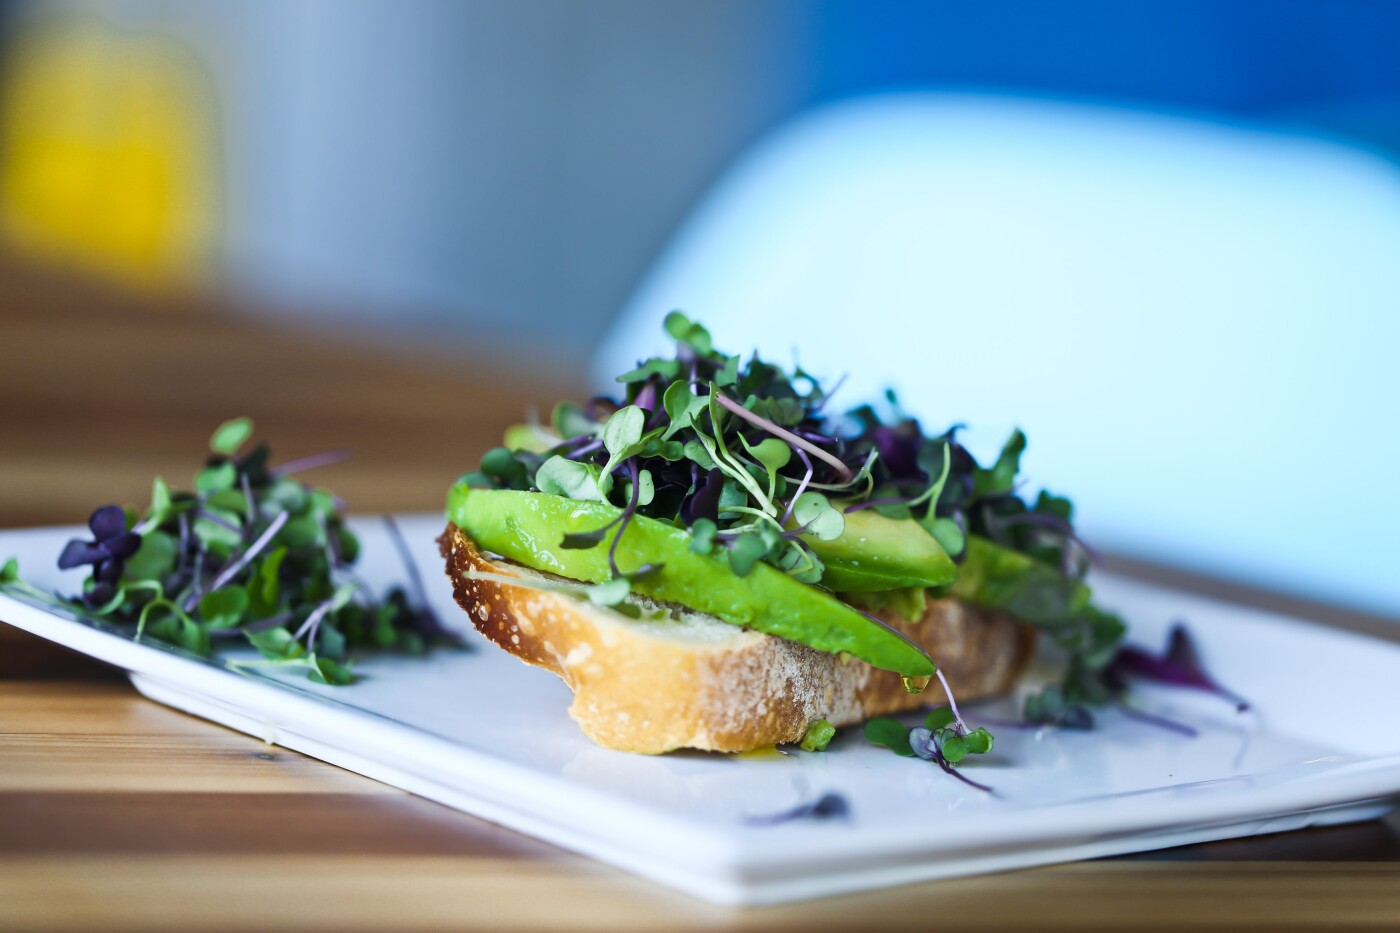 Avocado Toasts are super trending in San Diego right now. Found this version of the toast with nicely scented truffle oil and micro greens at the new Hillcrest spot 'Refill Cafe'. Not only was this toast super flavorful, but also offered enough colors & lighting textures for an awesome click.